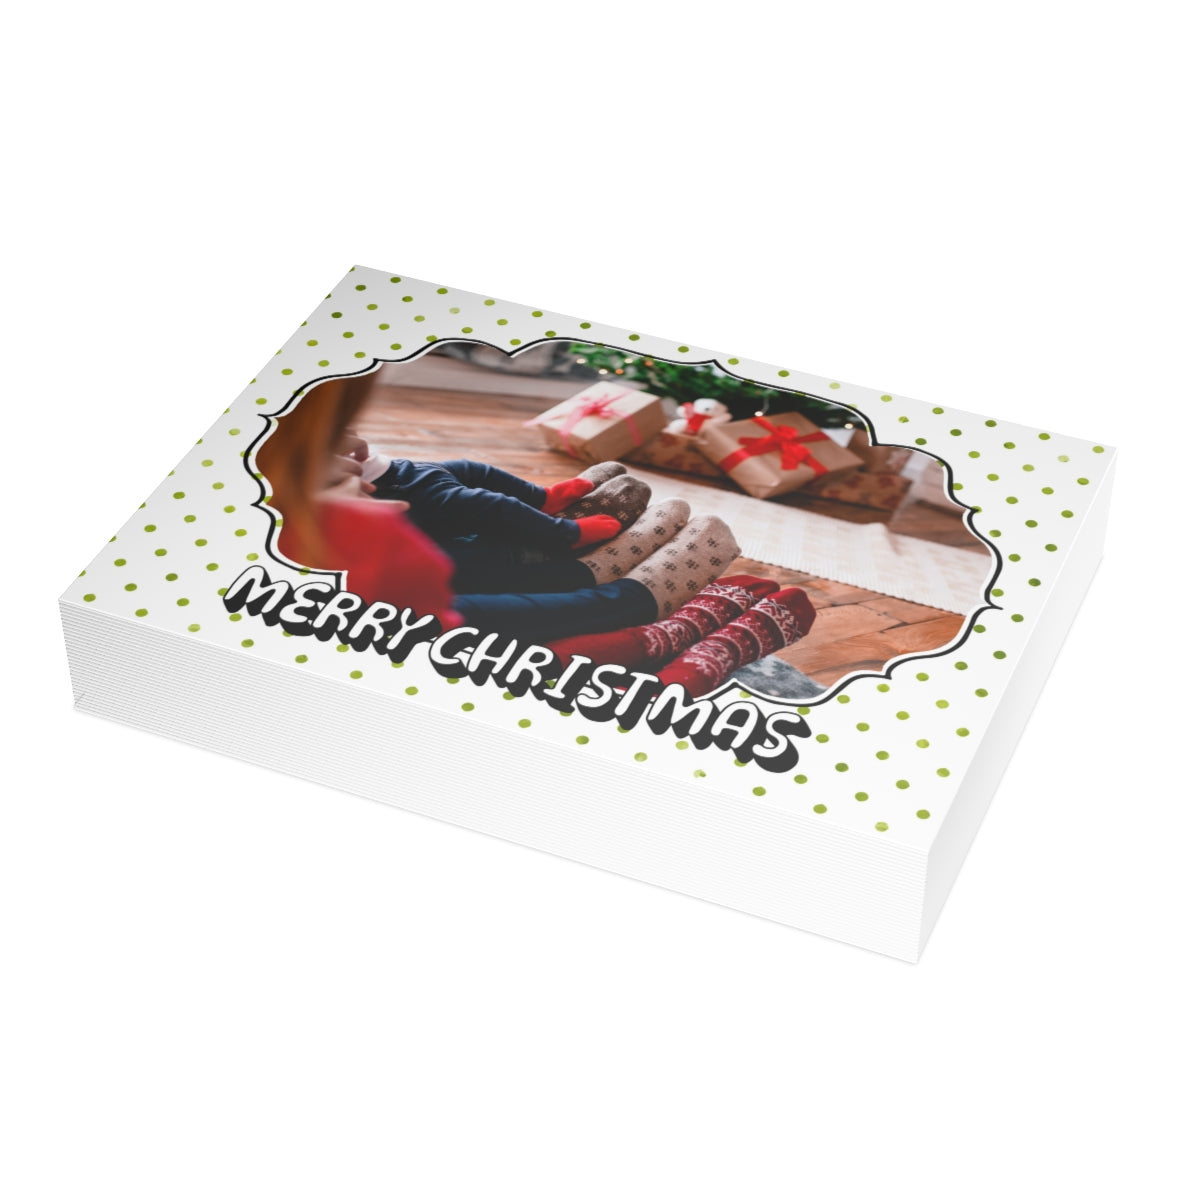 The Merriest Greeting Cards